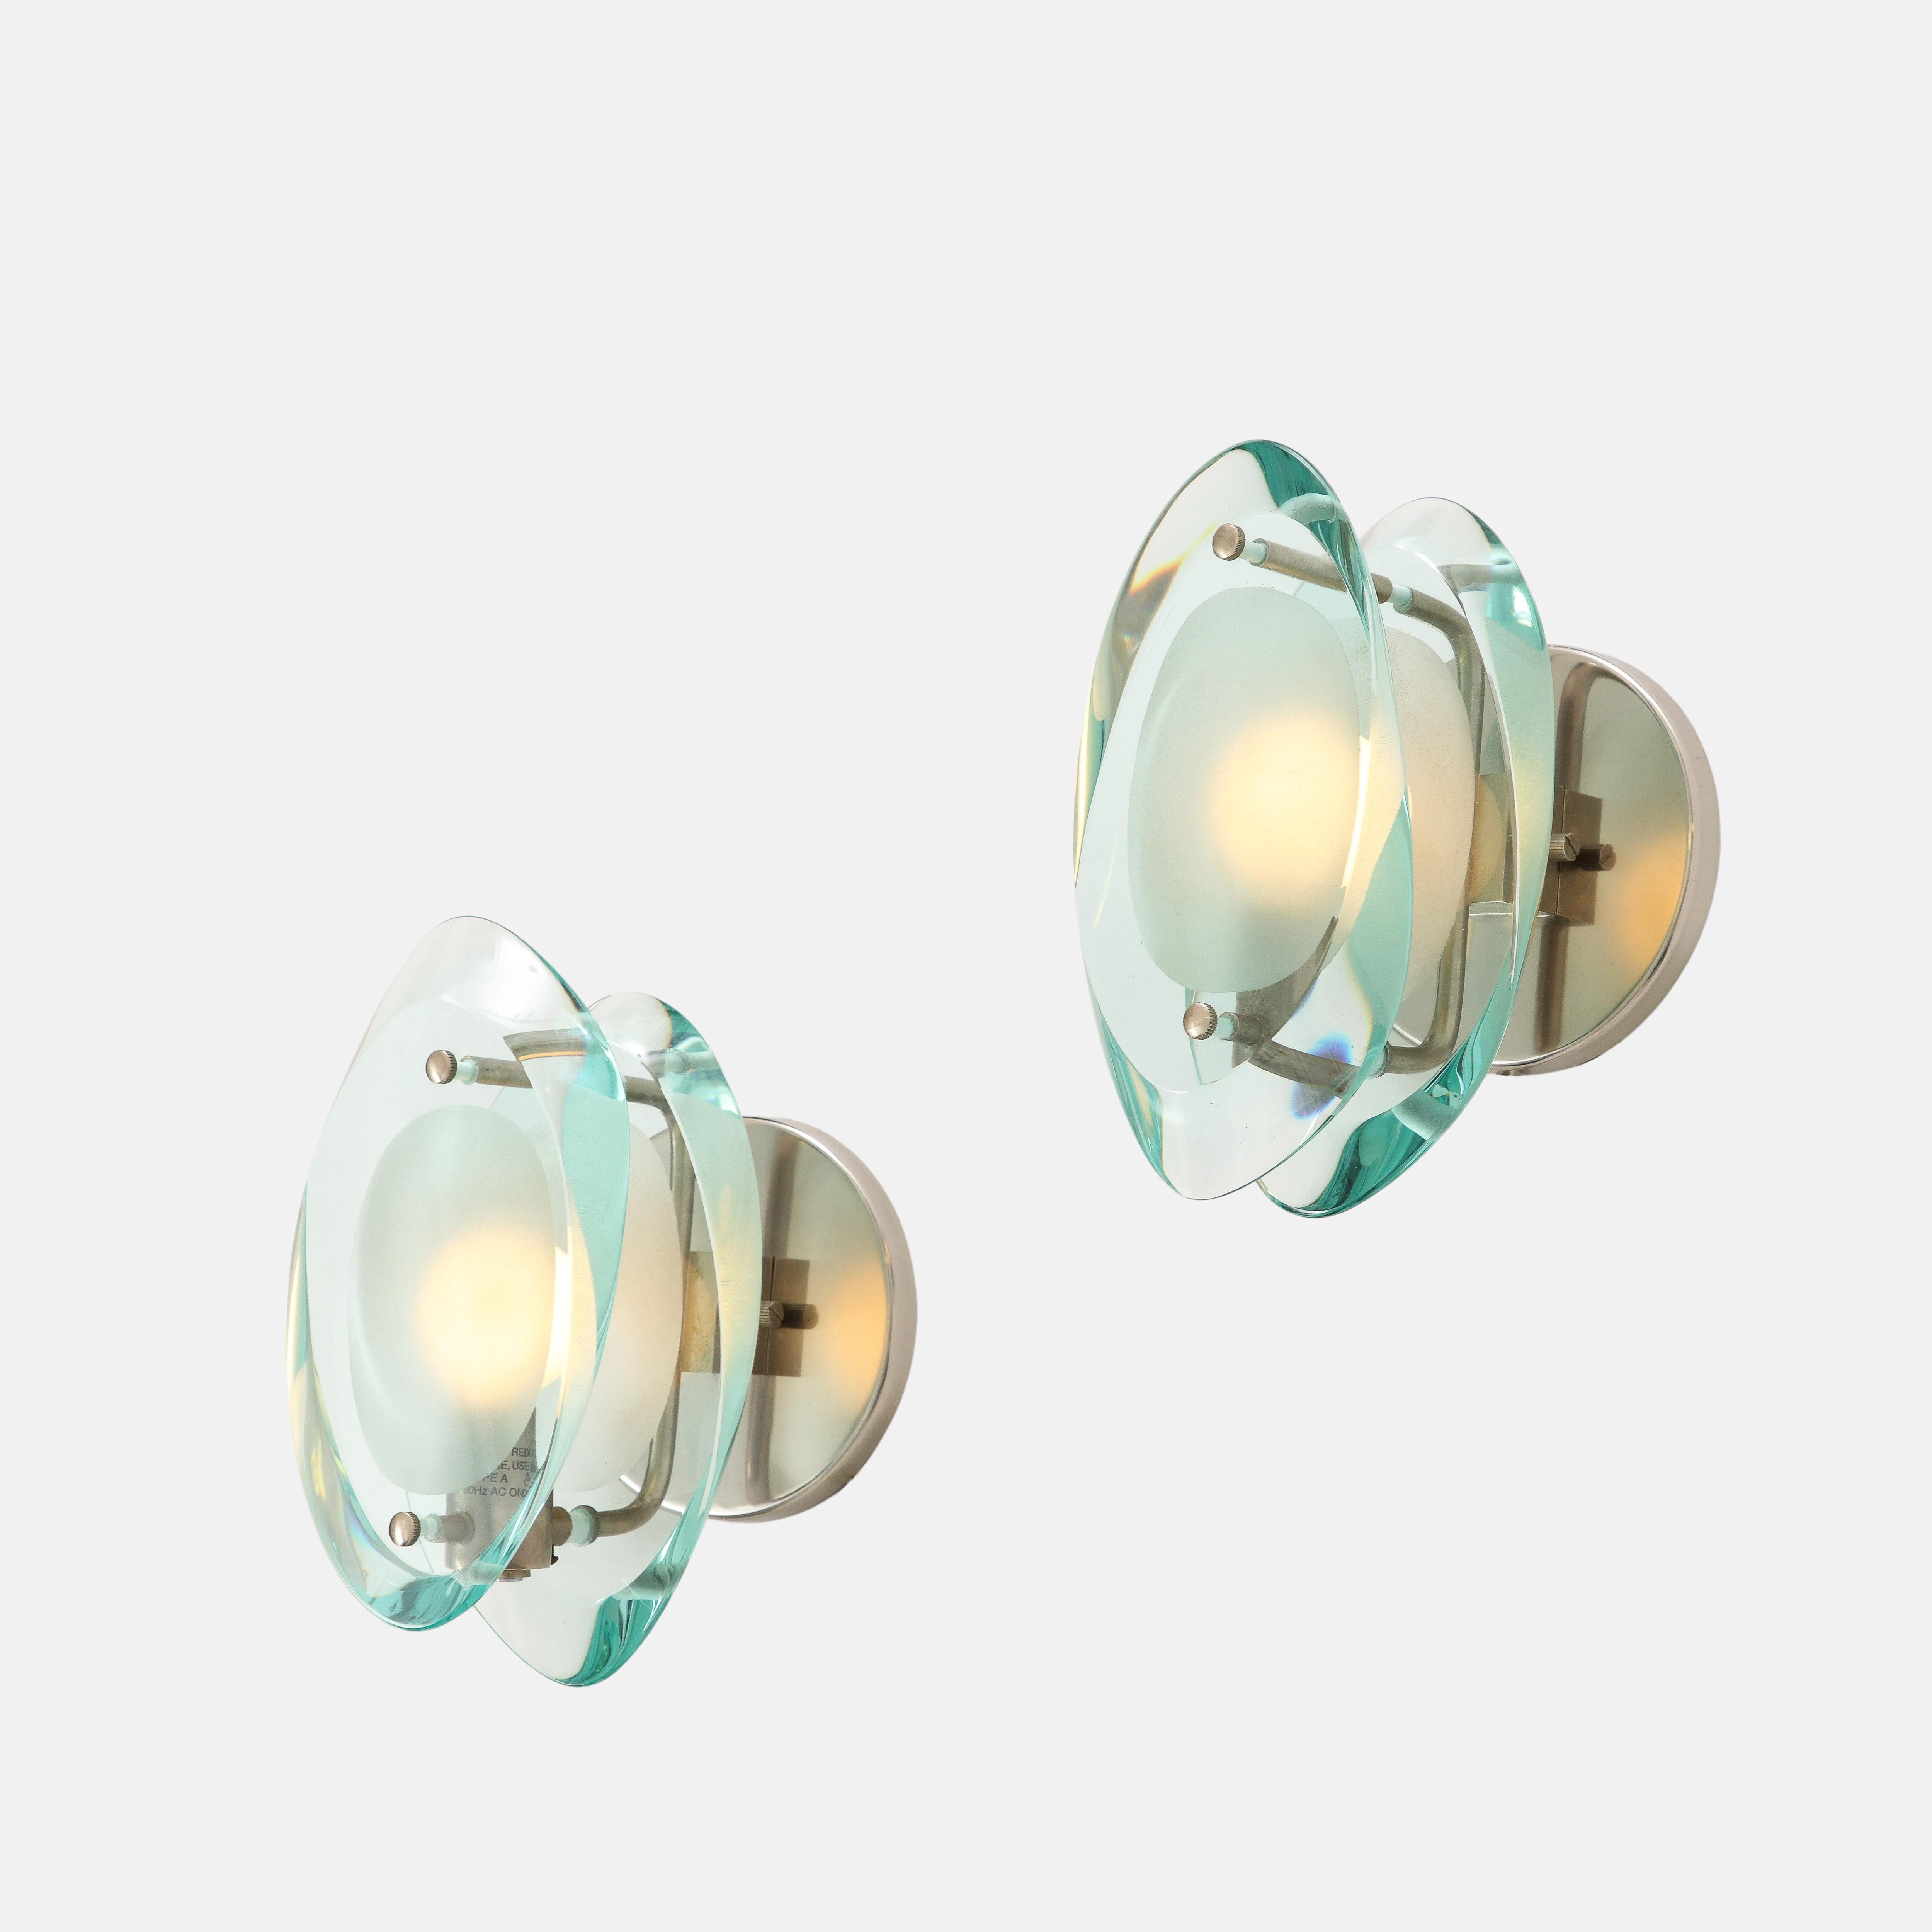 Max Ingrand for Fontana Arte pair of sconces model 2093 with double lens cut panels of thick profiled polished glass with acid-etched glass centers suspended by nickel-plated brass mounts. Rewired to U.S. standards including UL listing and custom